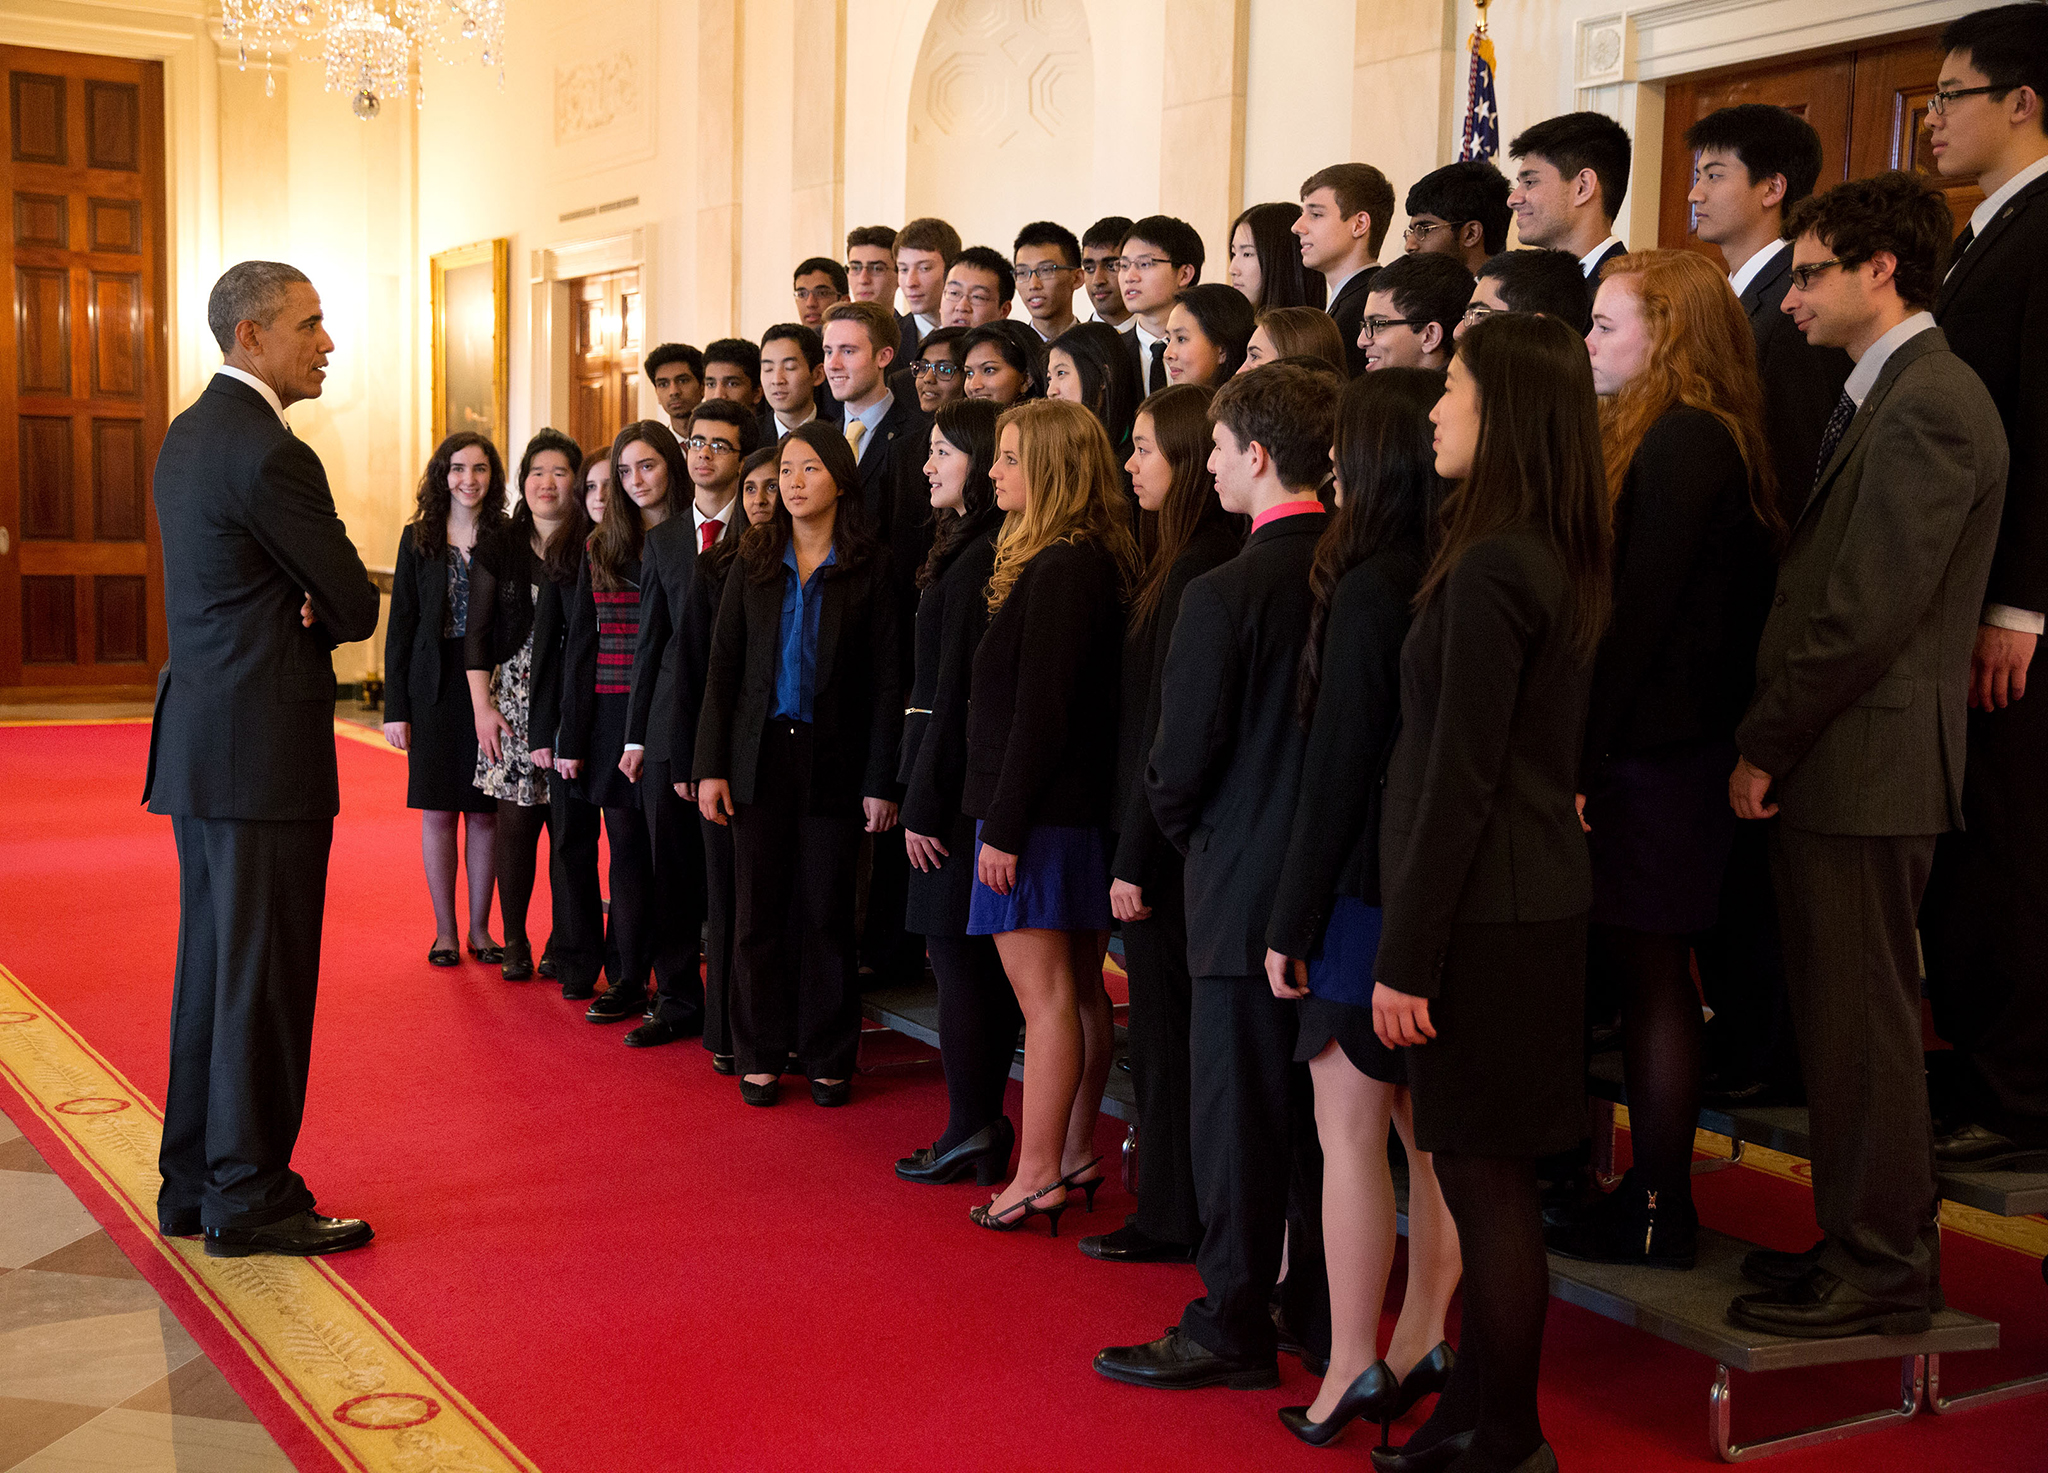 President Obama addresses STS finalists at the White House